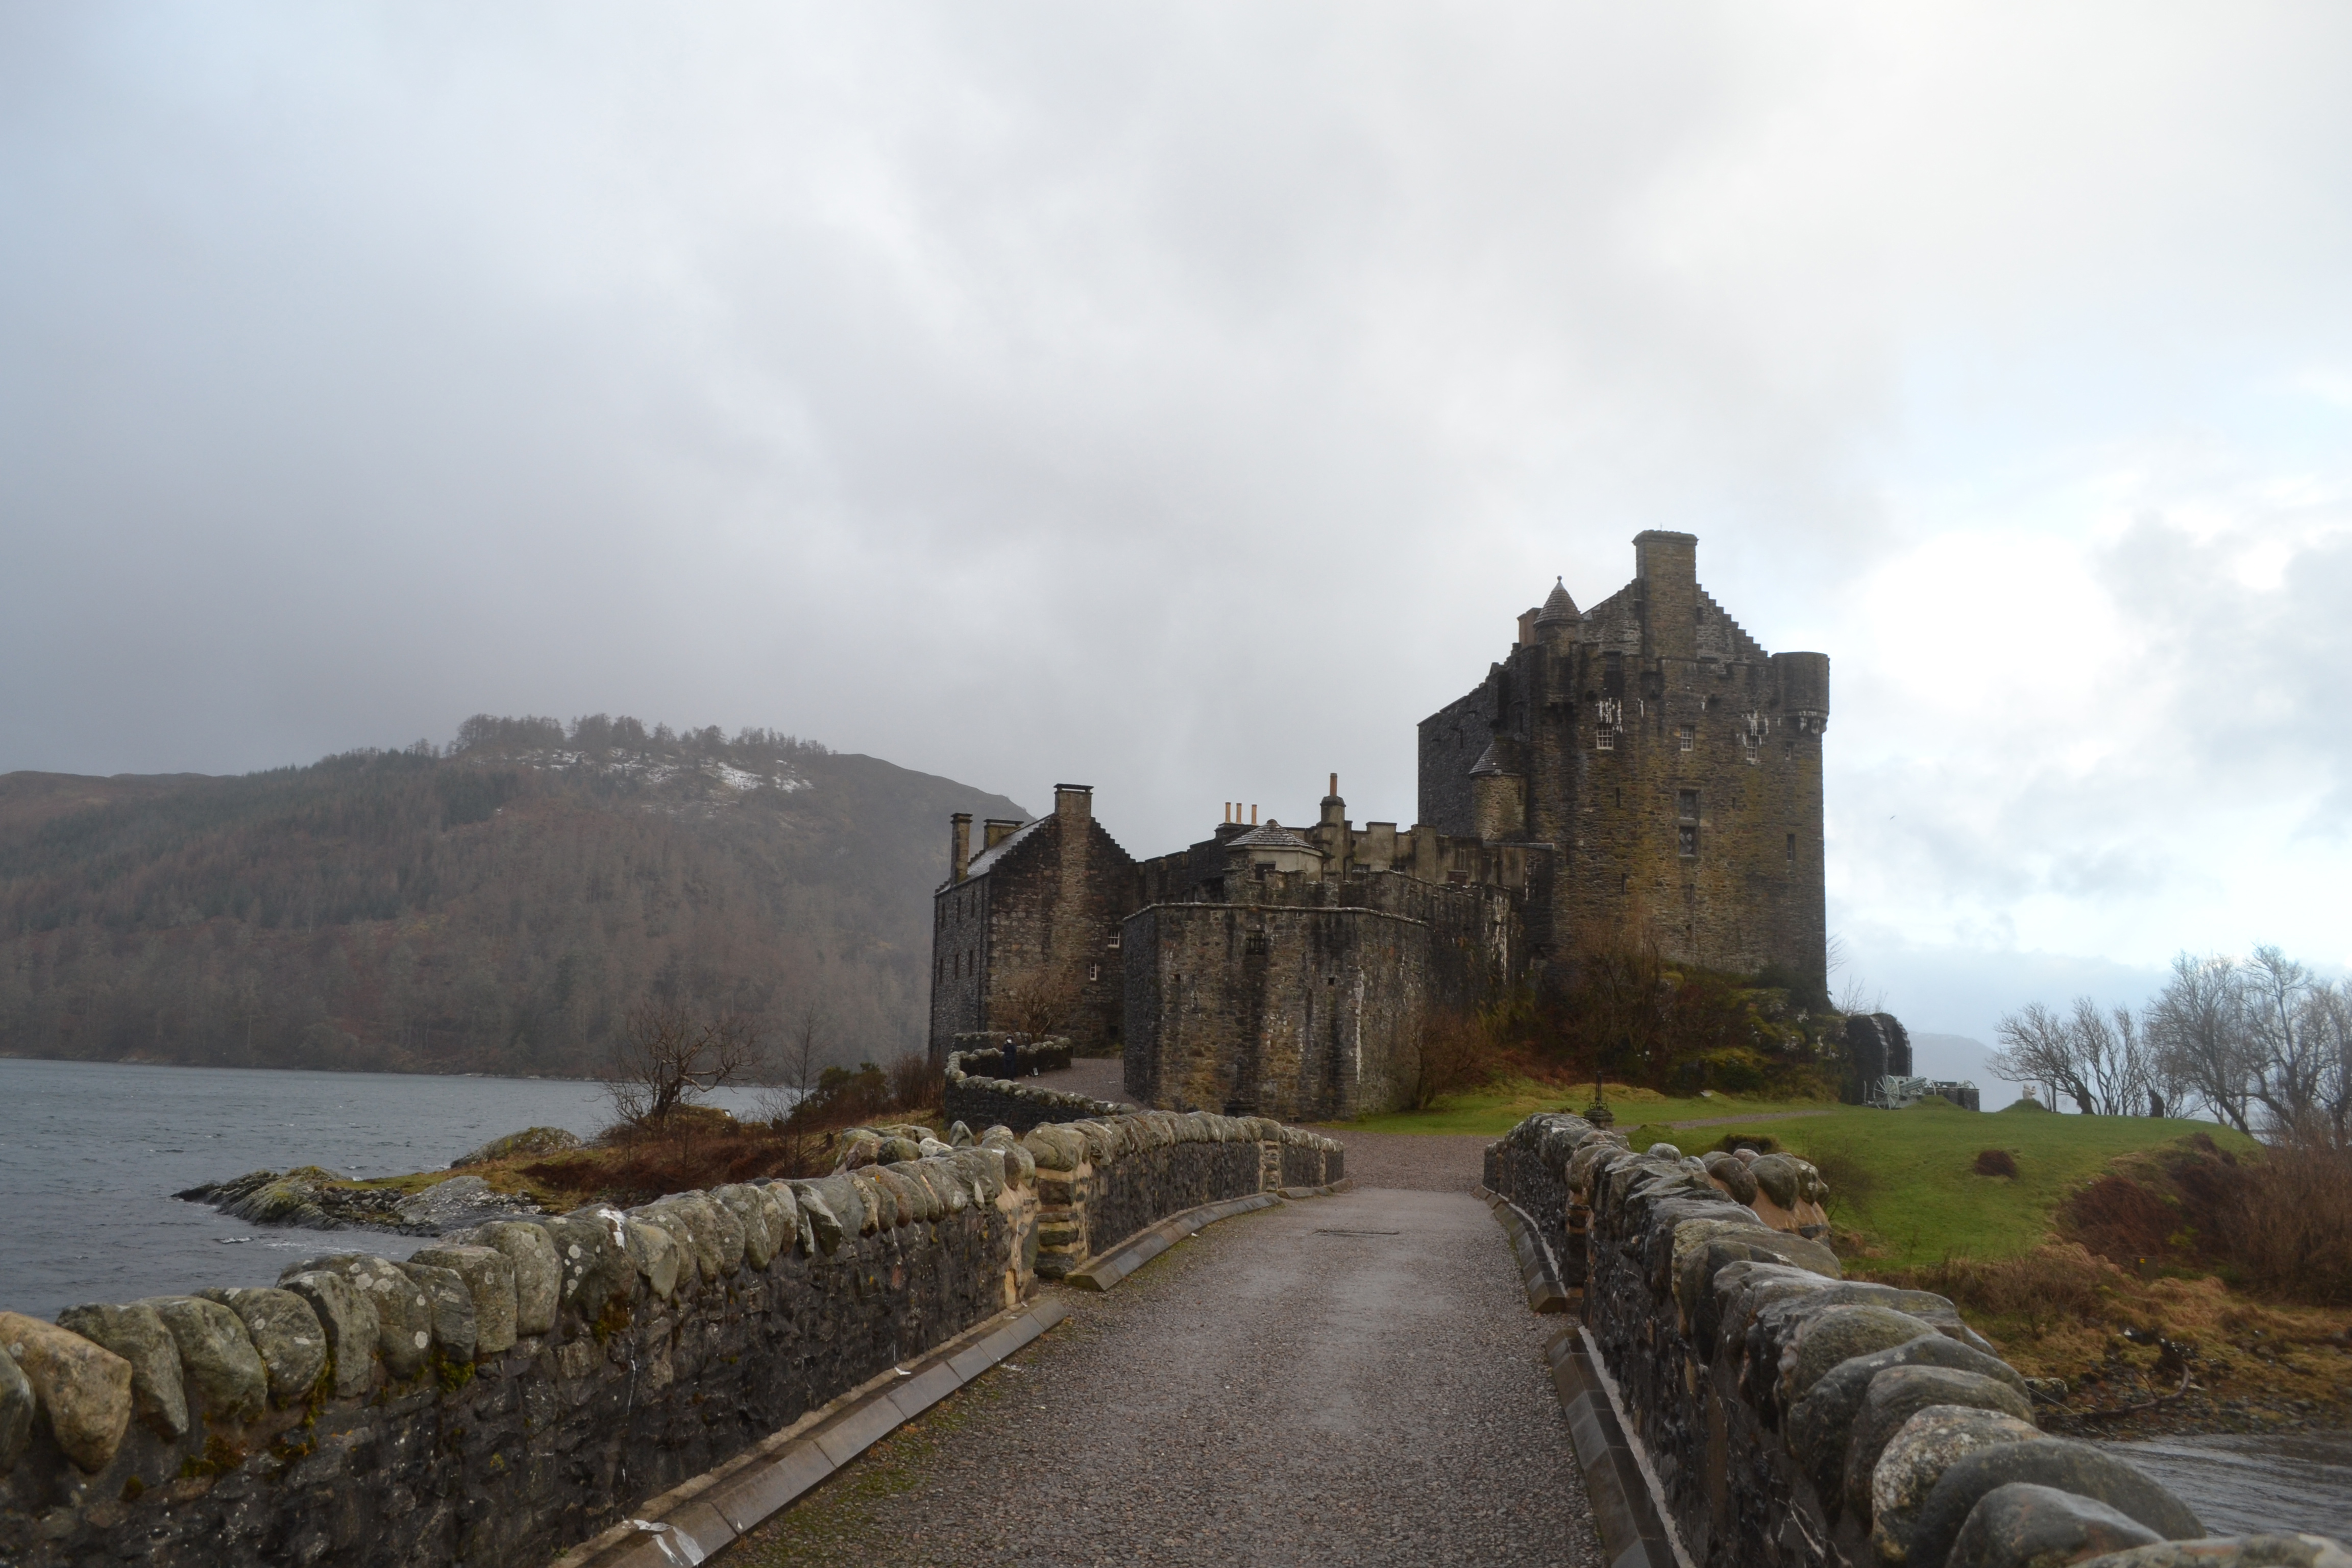 For Castles, Head to Scotland